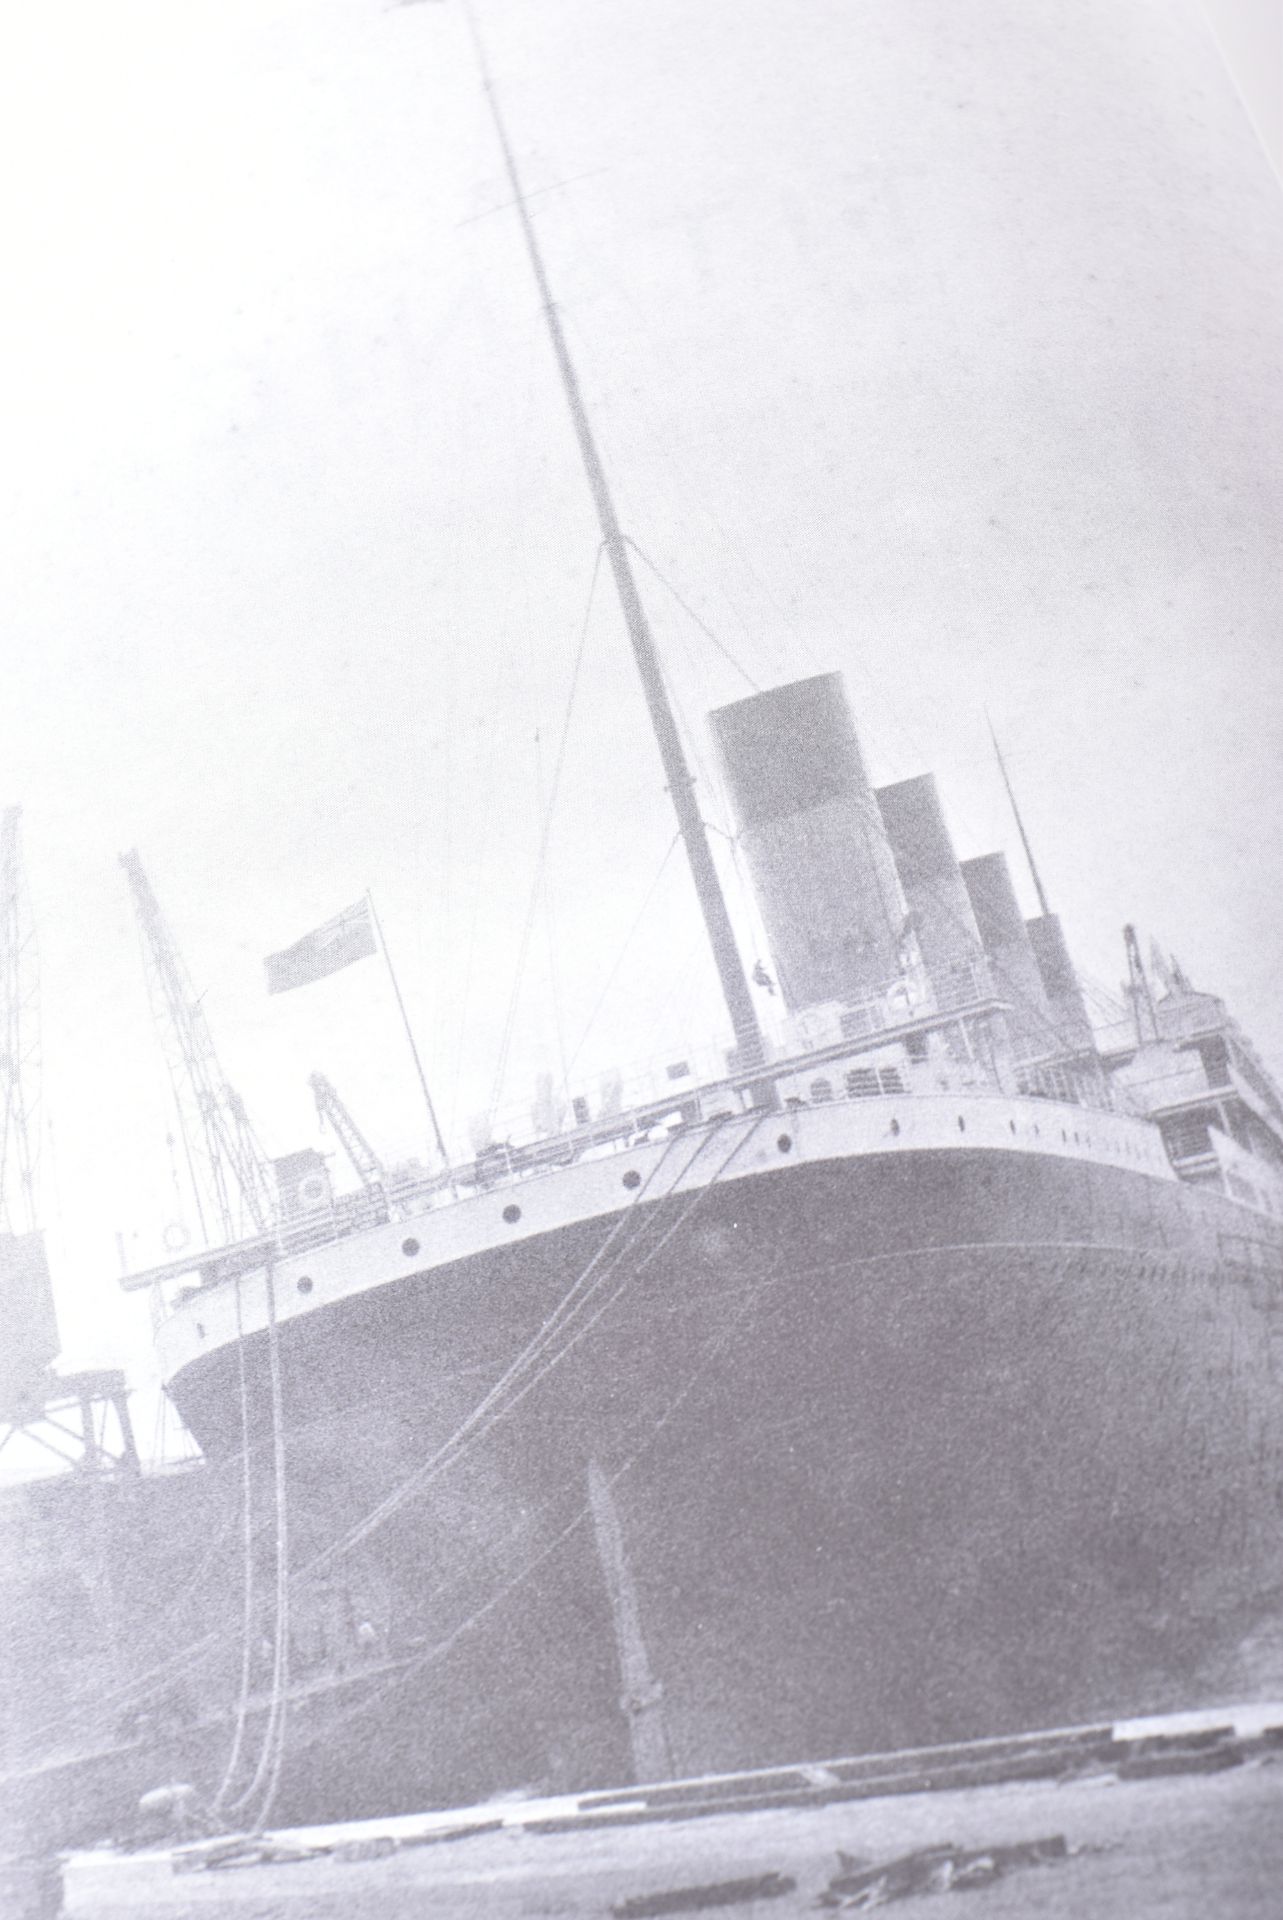 RMS TITANIC - THE SHIP MAGNIFICENT - THE HISTORY PRESS - Image 5 of 5